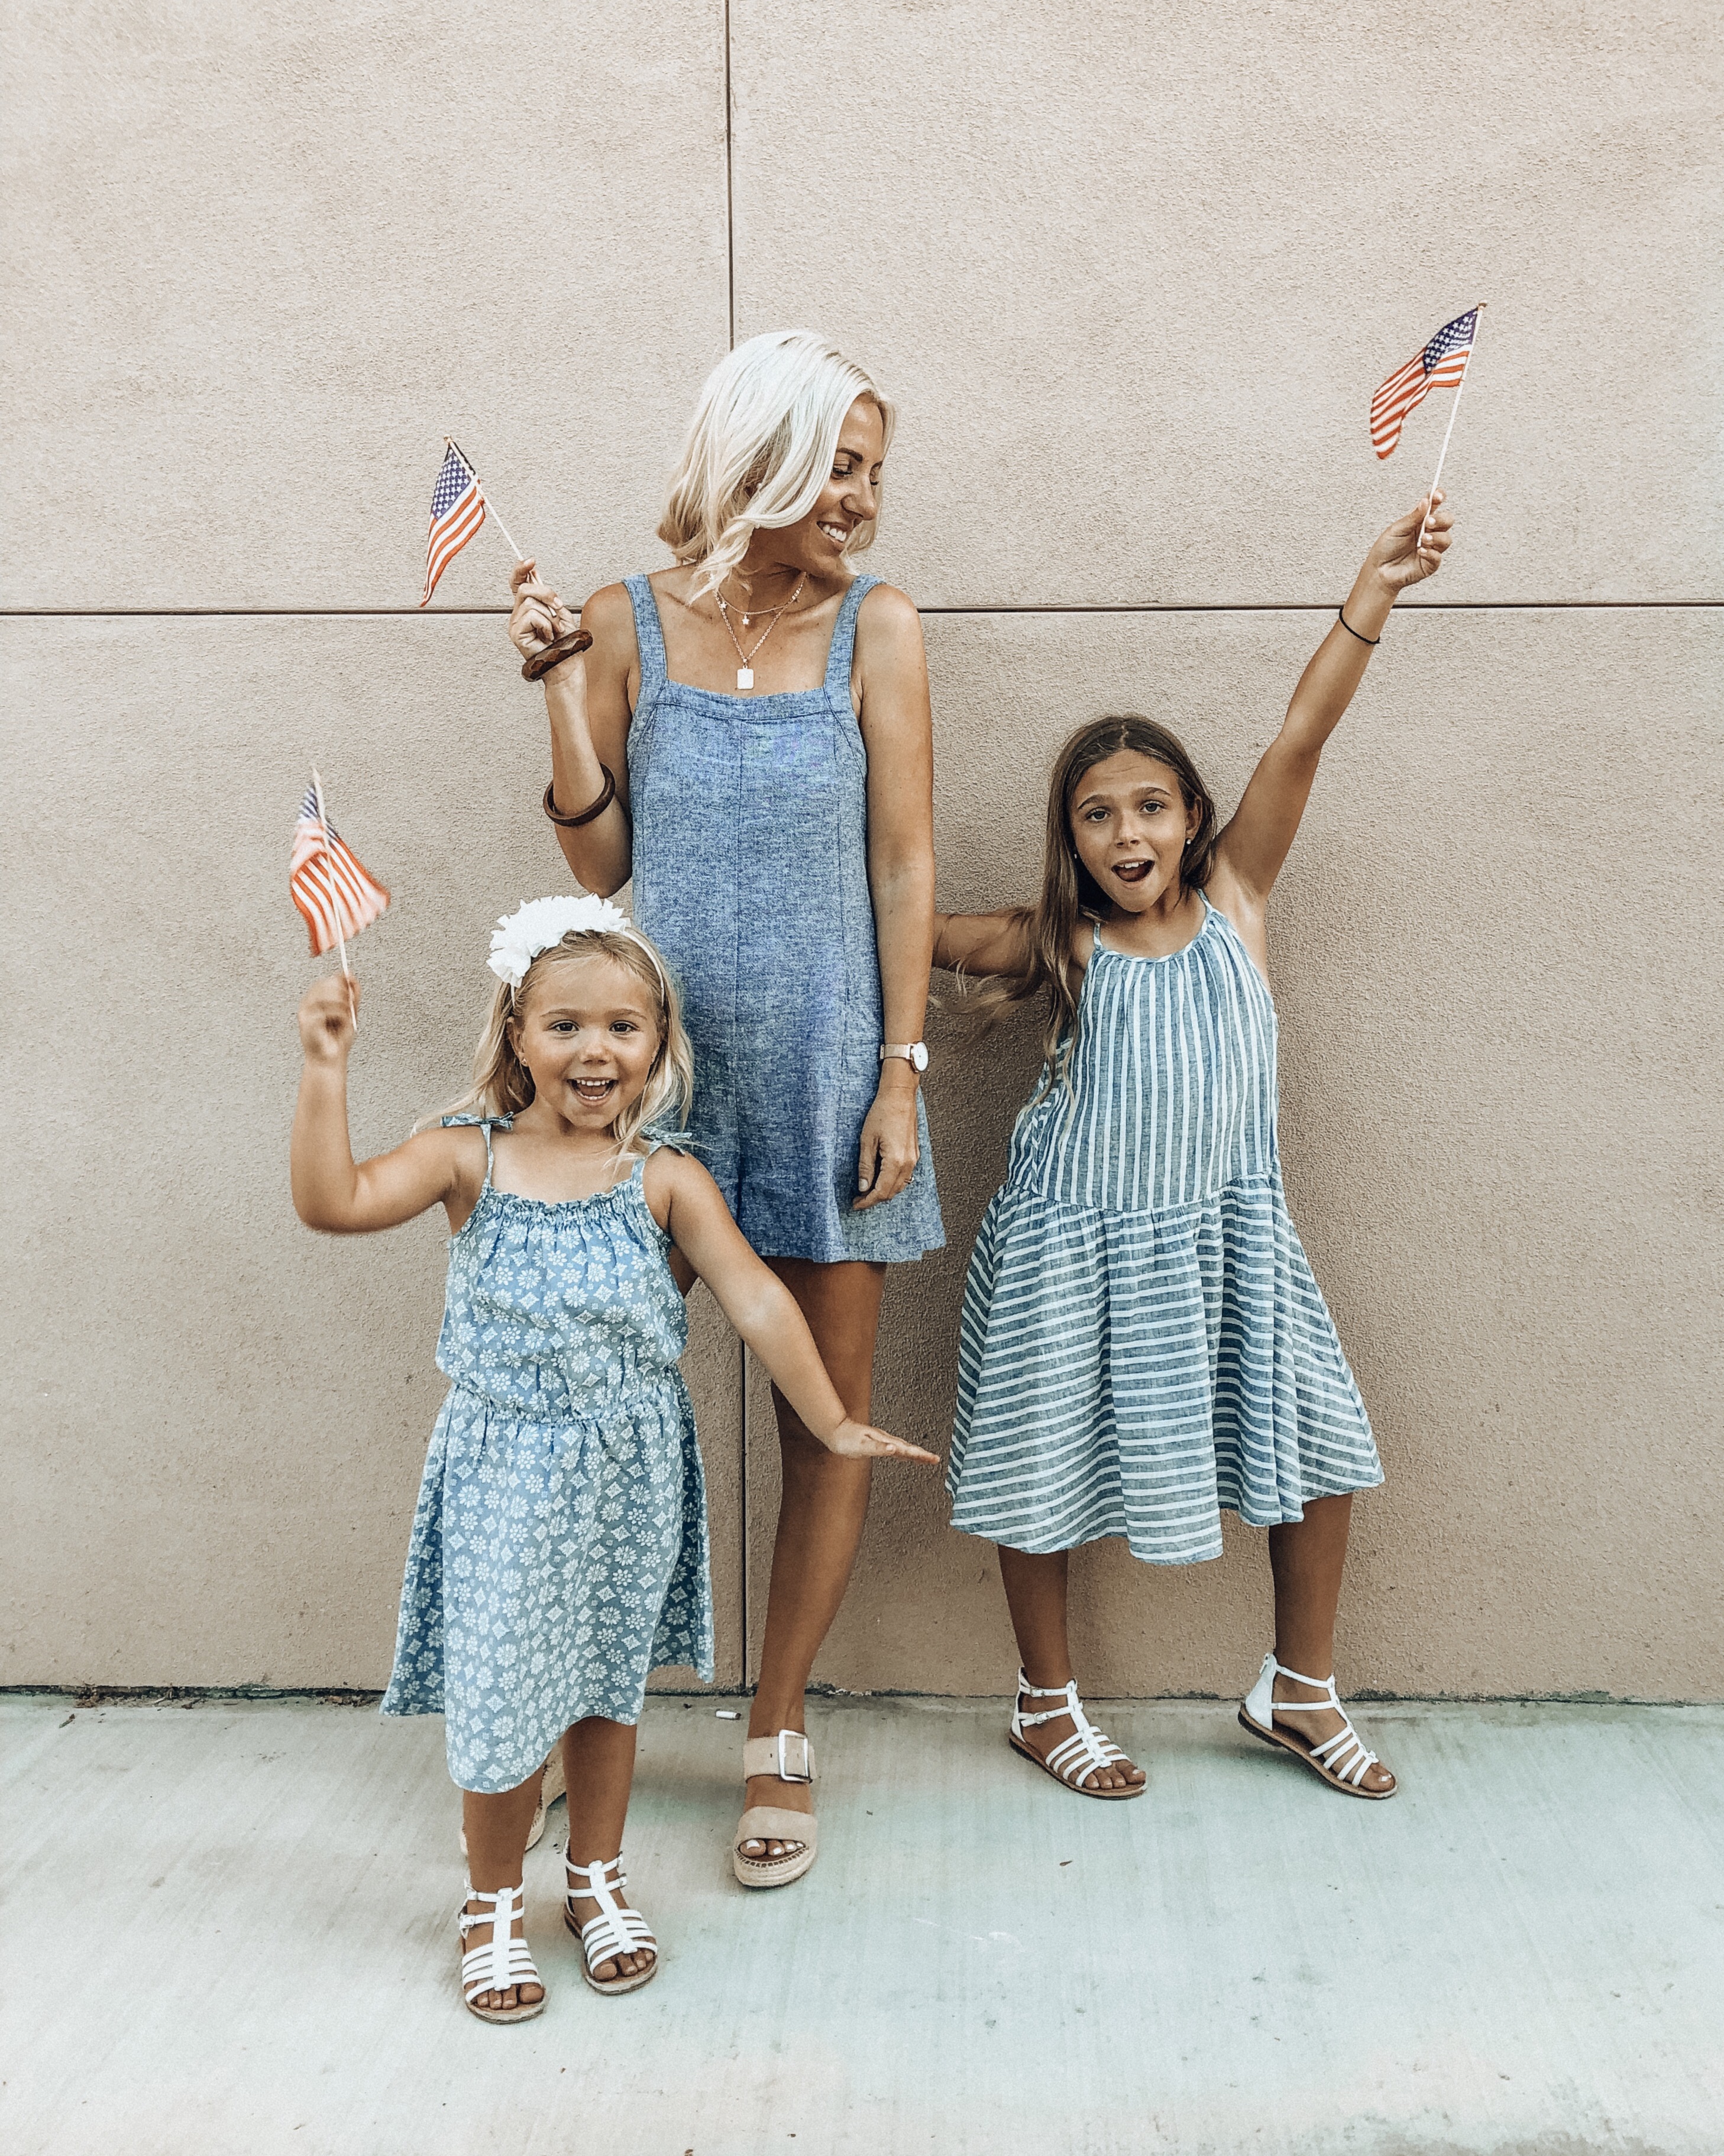 4TH OF JULY SALES- Jaclyn De Leon Style- Are you shopping this holiday? There are tons of good sales going on from 50% off to crazy shorts + swimsuit sales. Time to stock up for Summer!